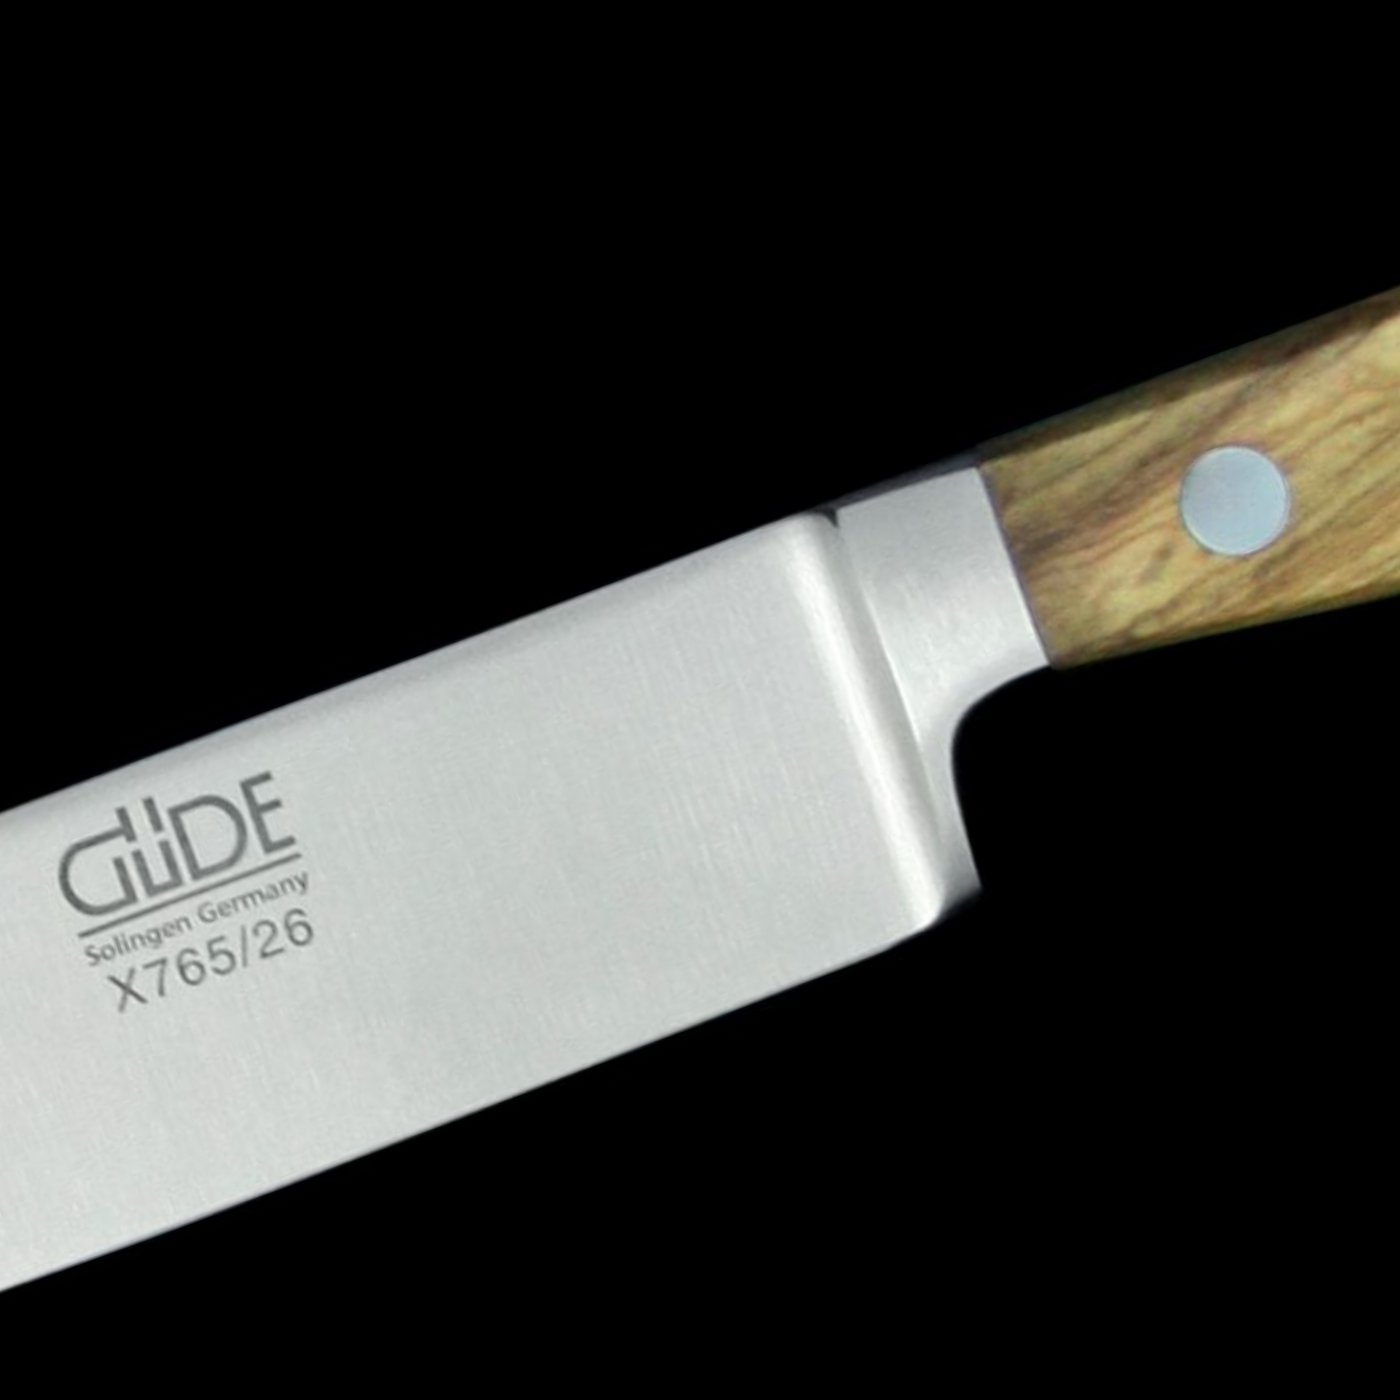 Gude Alpha Olive Slicing Knife With Olivewood Handle, 10-in - Kitchen Universe